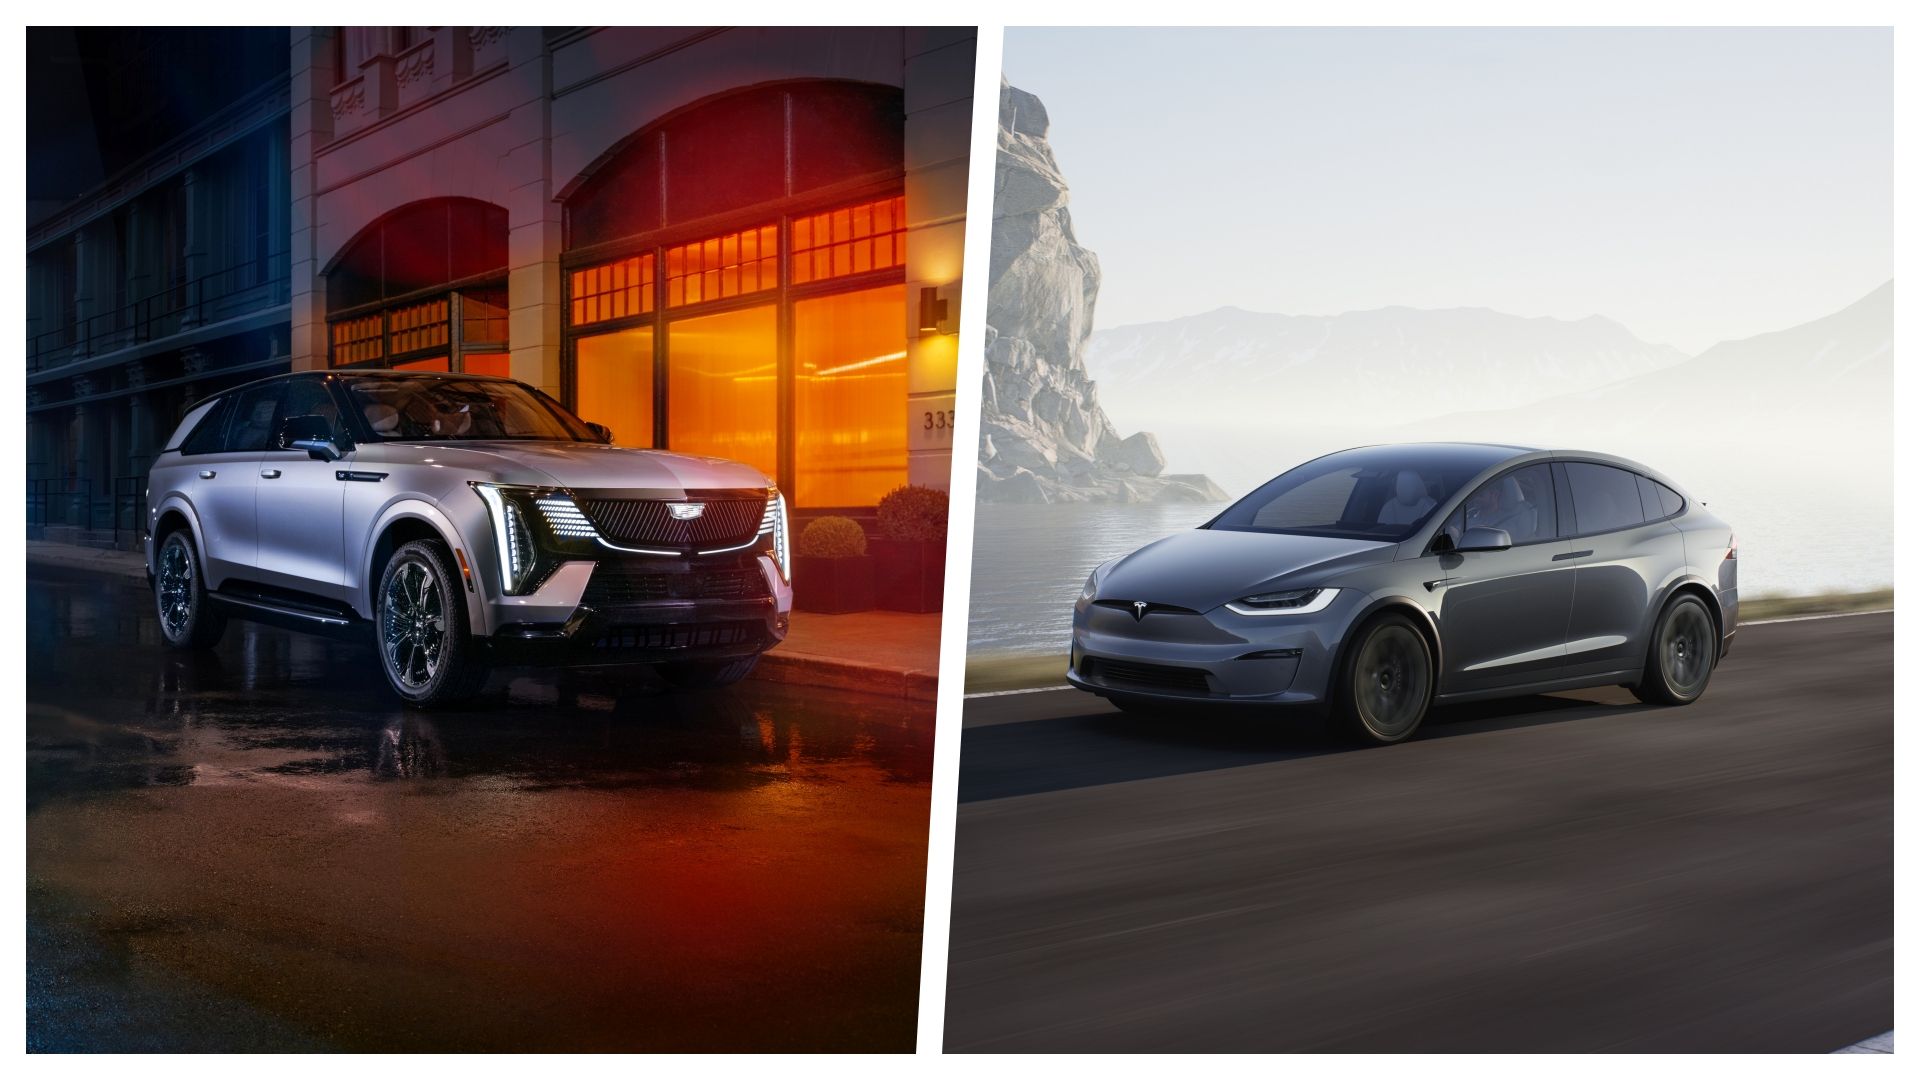 A collage of the Cadillac Escalade IQ and Tesla Model X